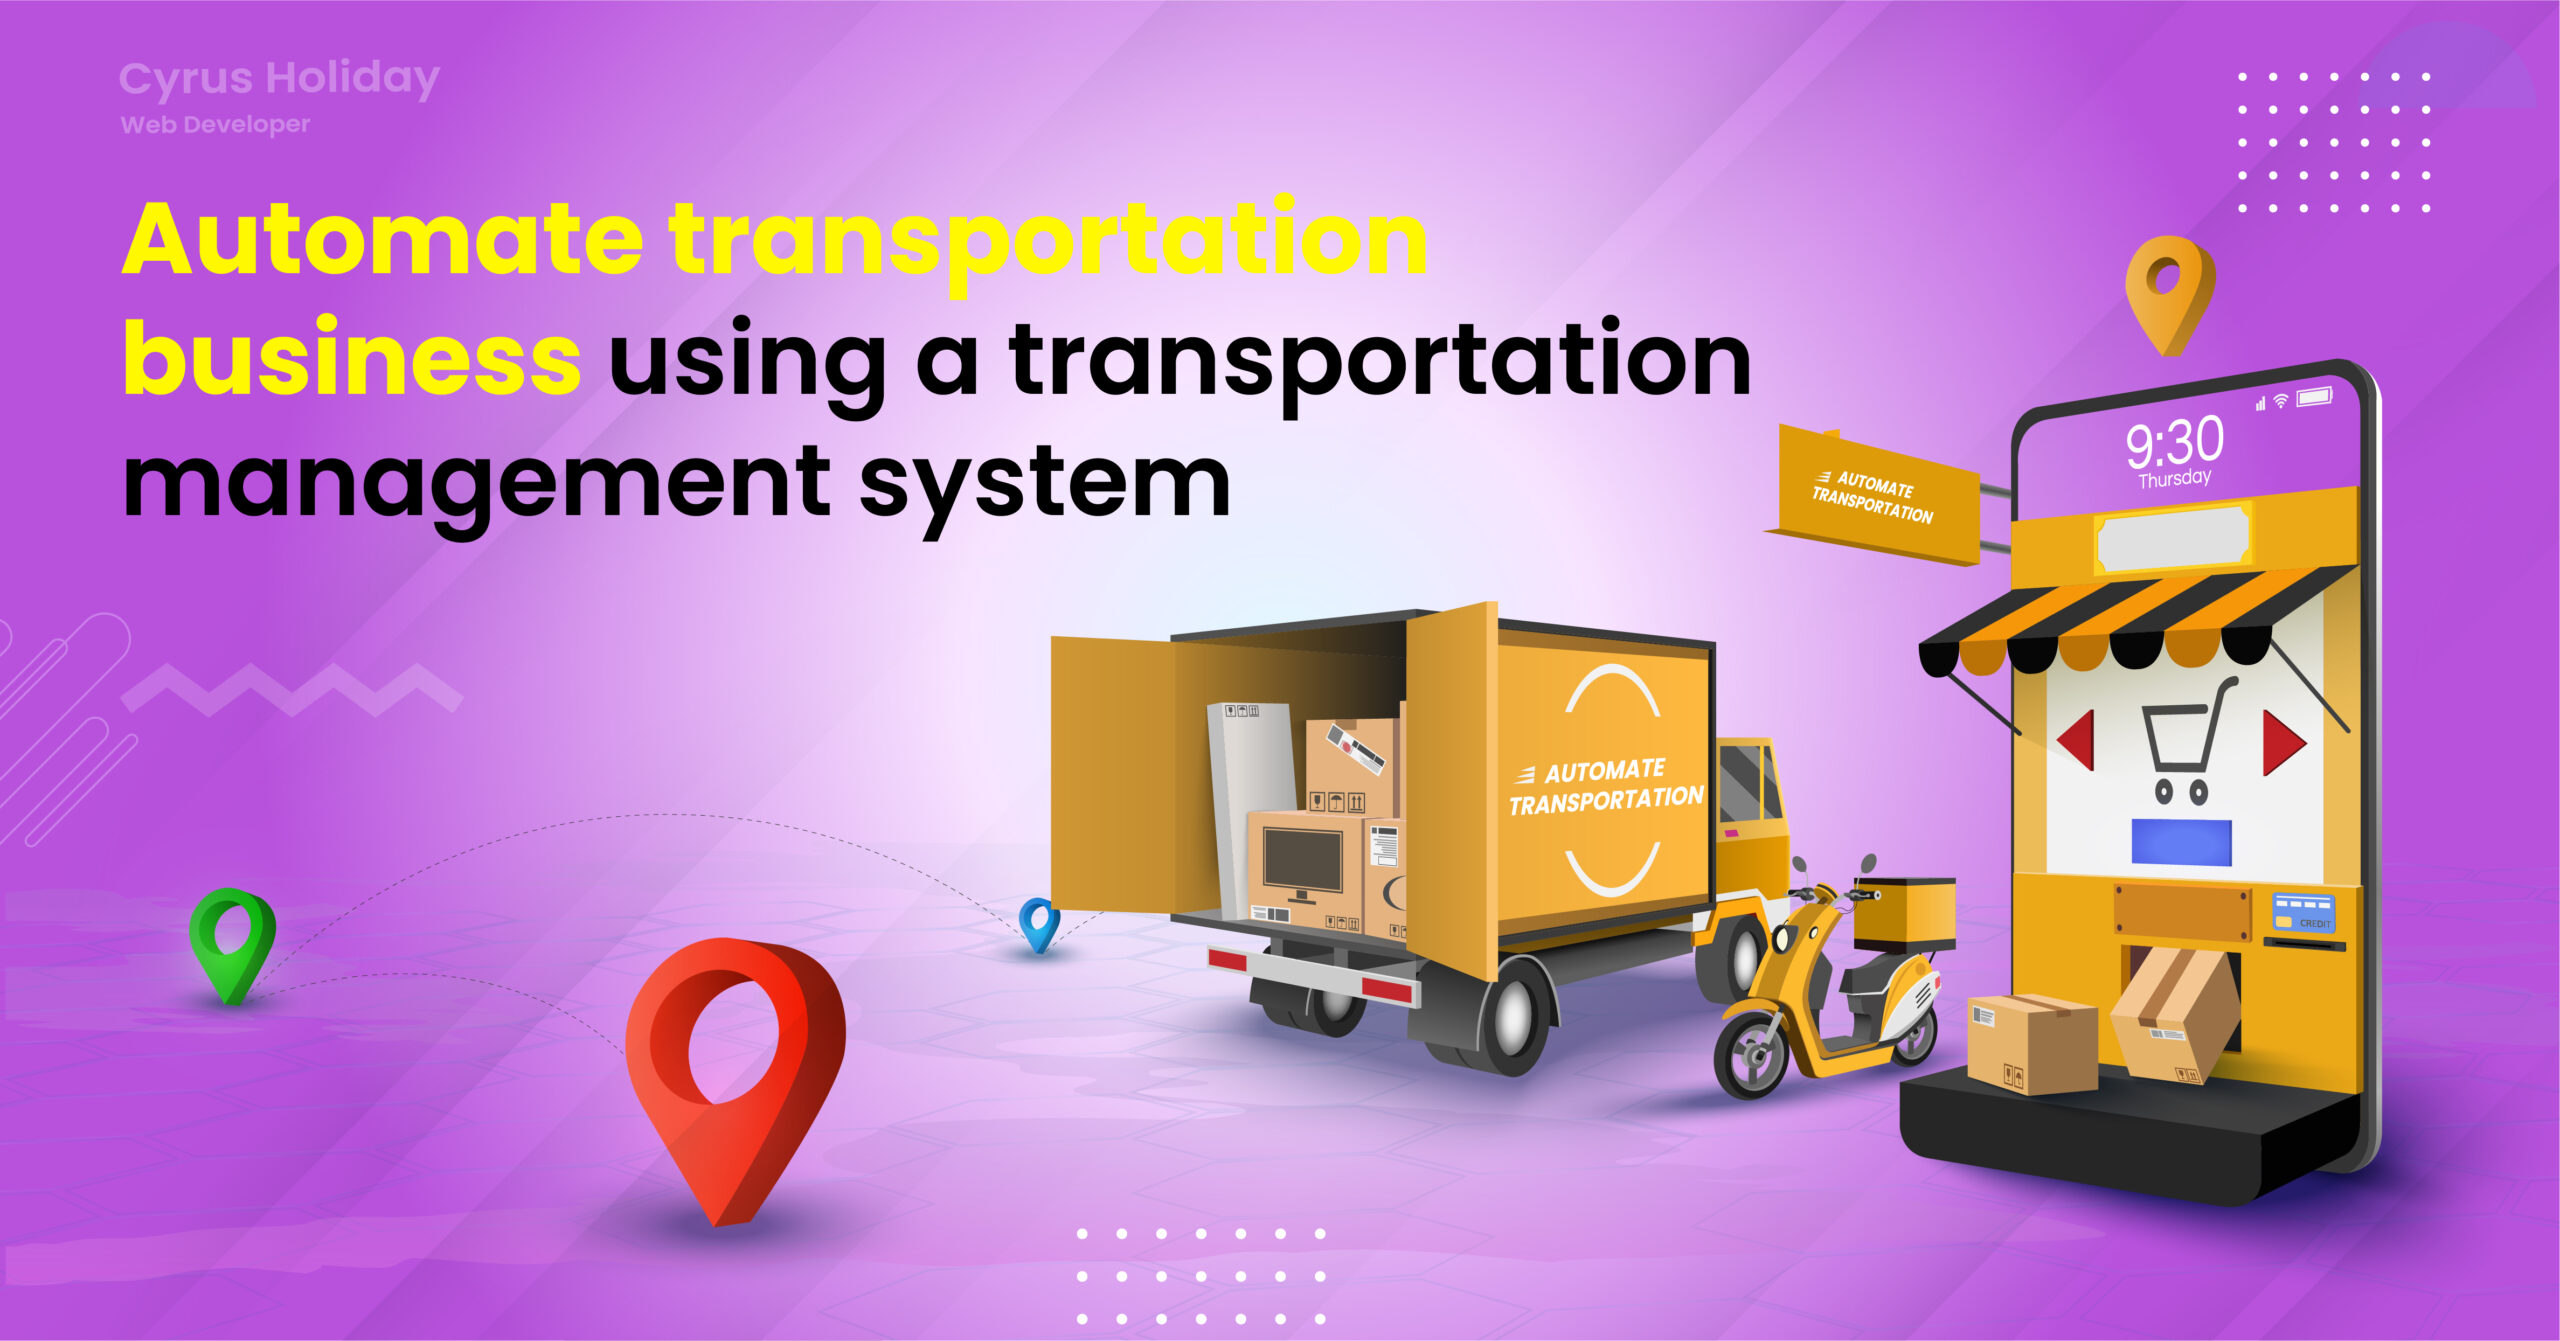 How much does it cost to automate transportation business using a transportation management system